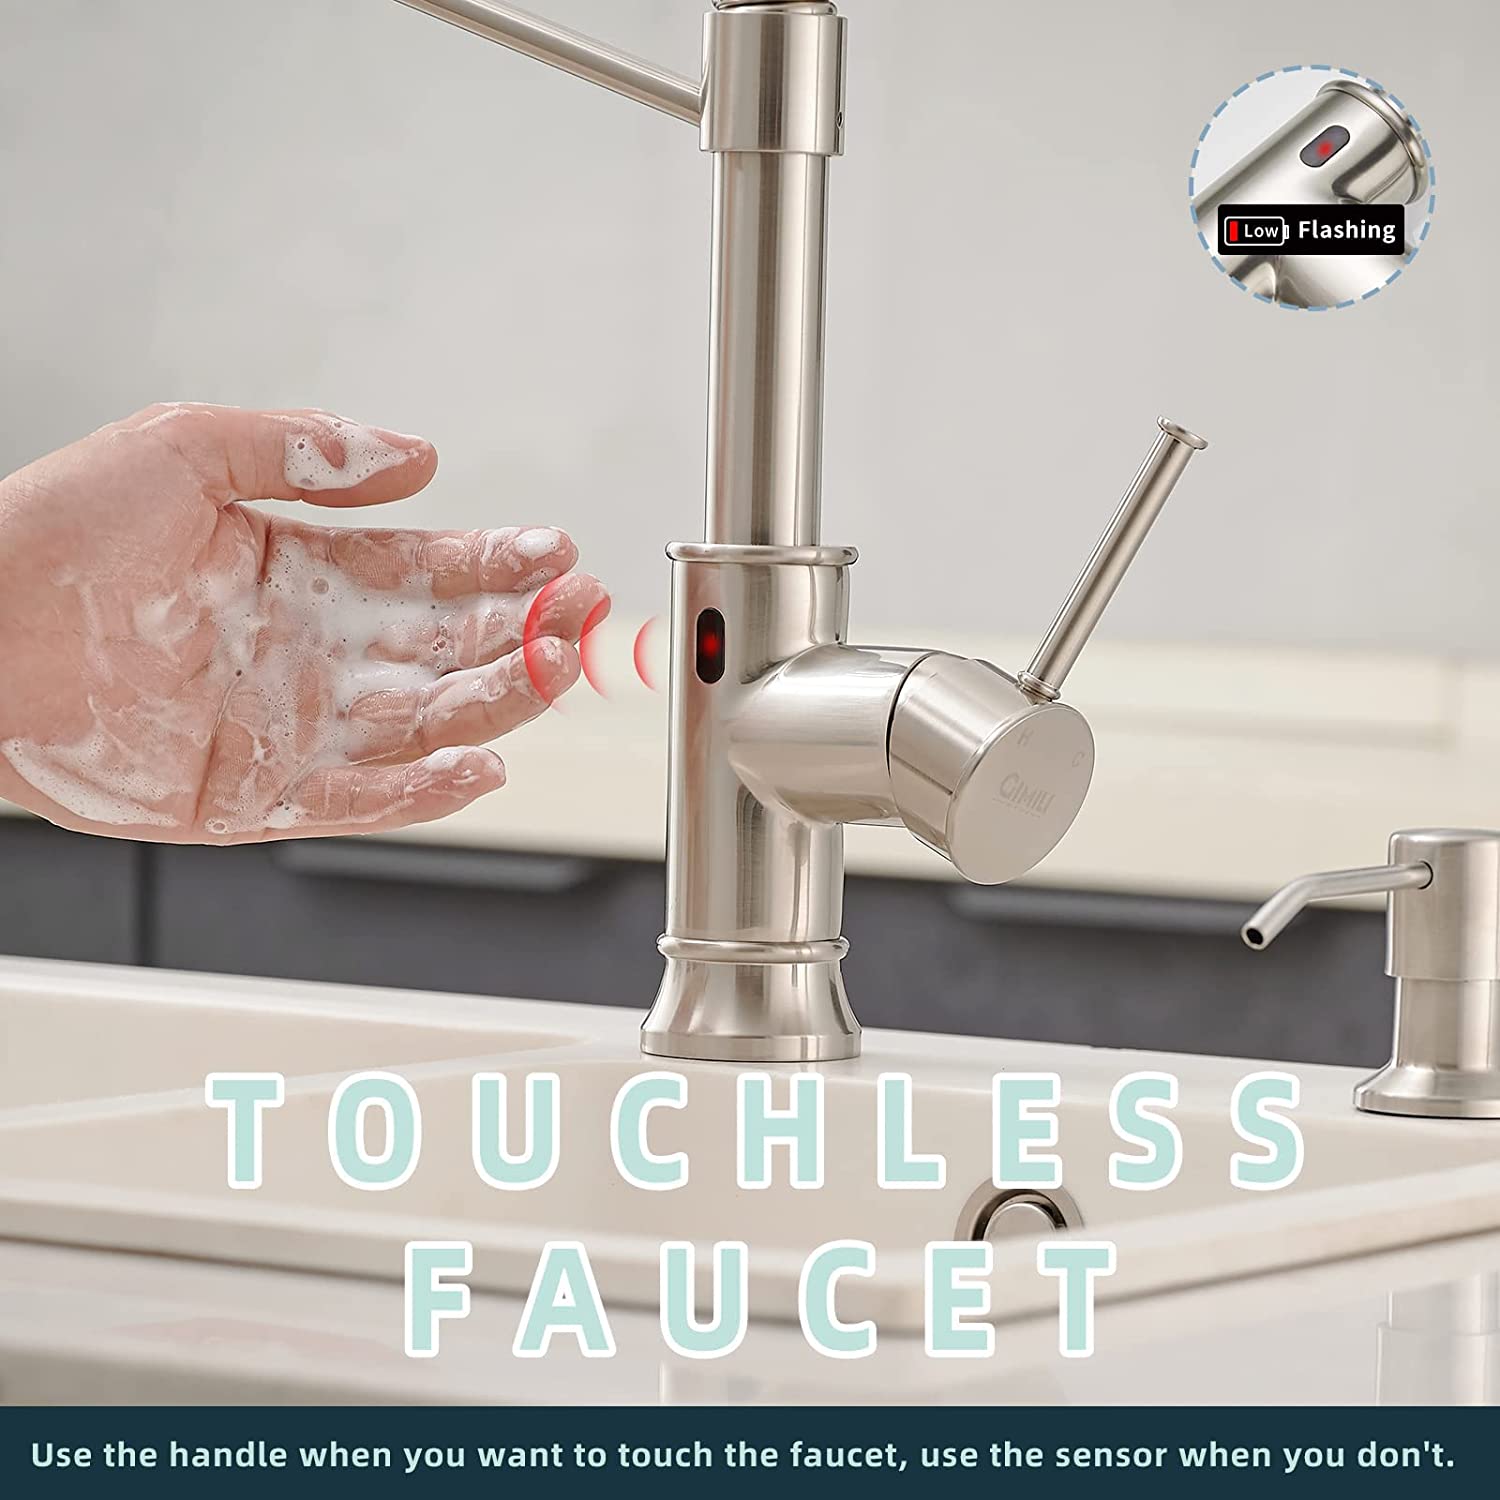 Smart Touchless Kitchen Sink Faucet with Pull Down Sprayer, Motion Sensor Activated Hands-Free Single Handle Kitchen Faucet Brushed Nickel.